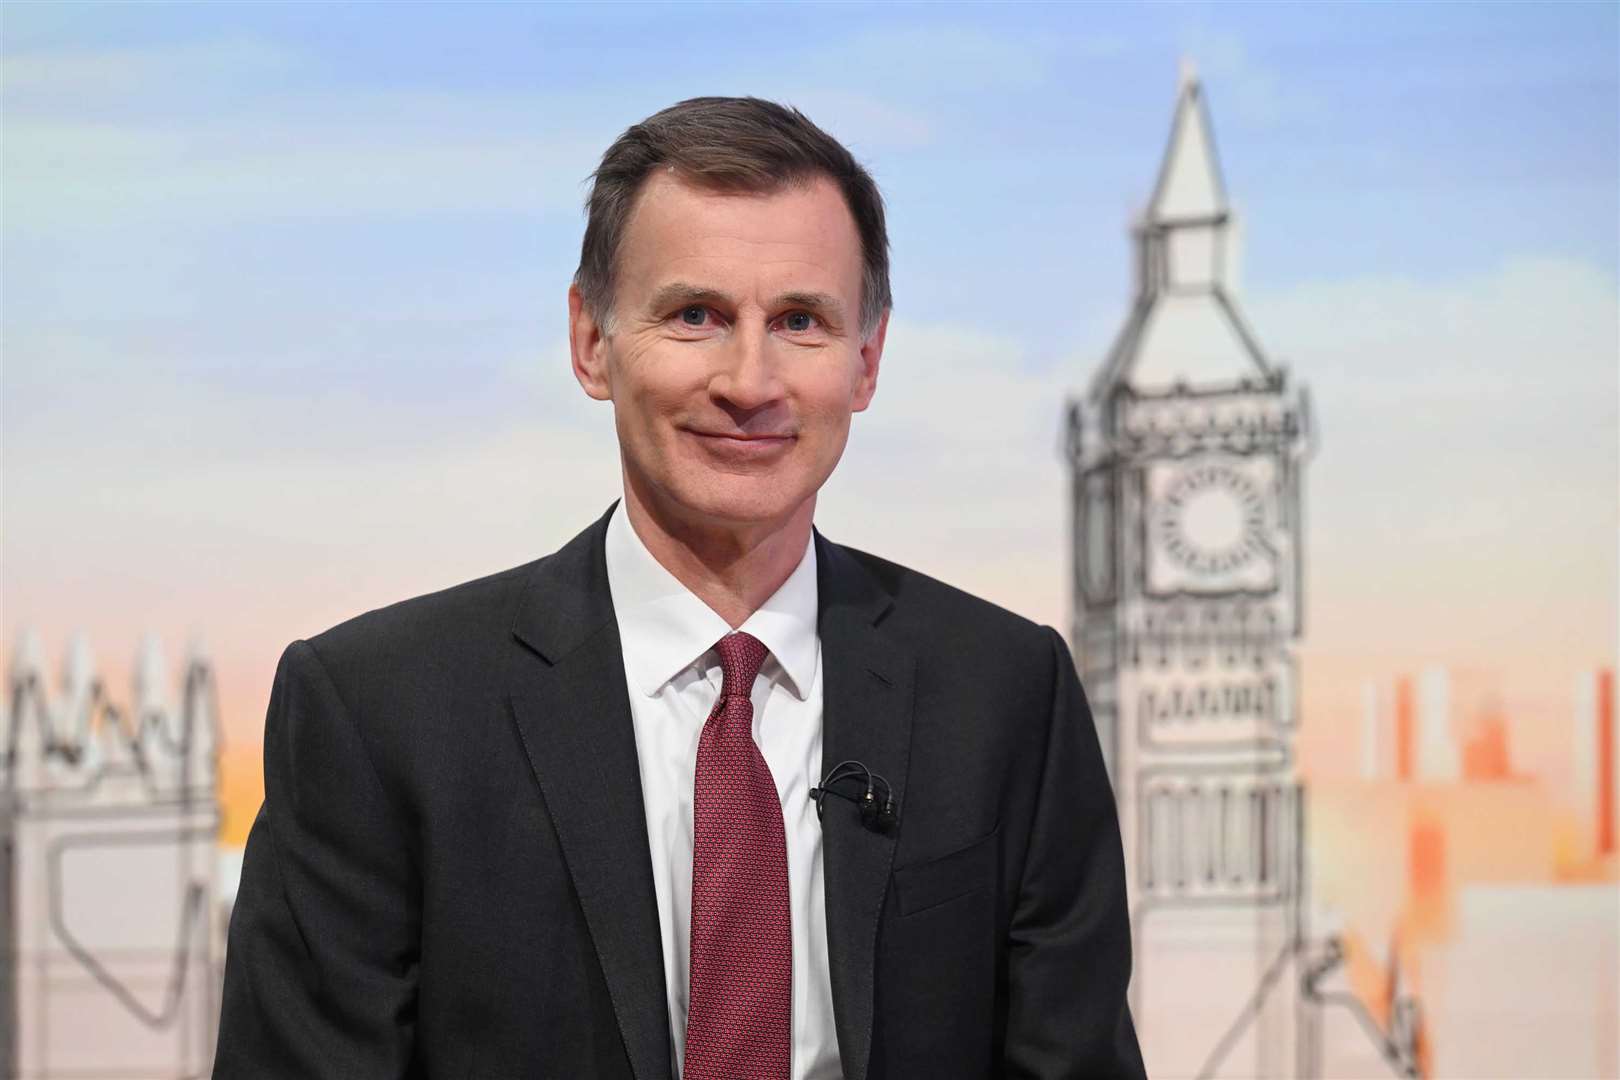 Chancellor of the Exchequer Jeremy Hunt claimed domestic oil and gas is four times cleaner than imported oil and gas (Jeff Overs/BBC/PA credit)